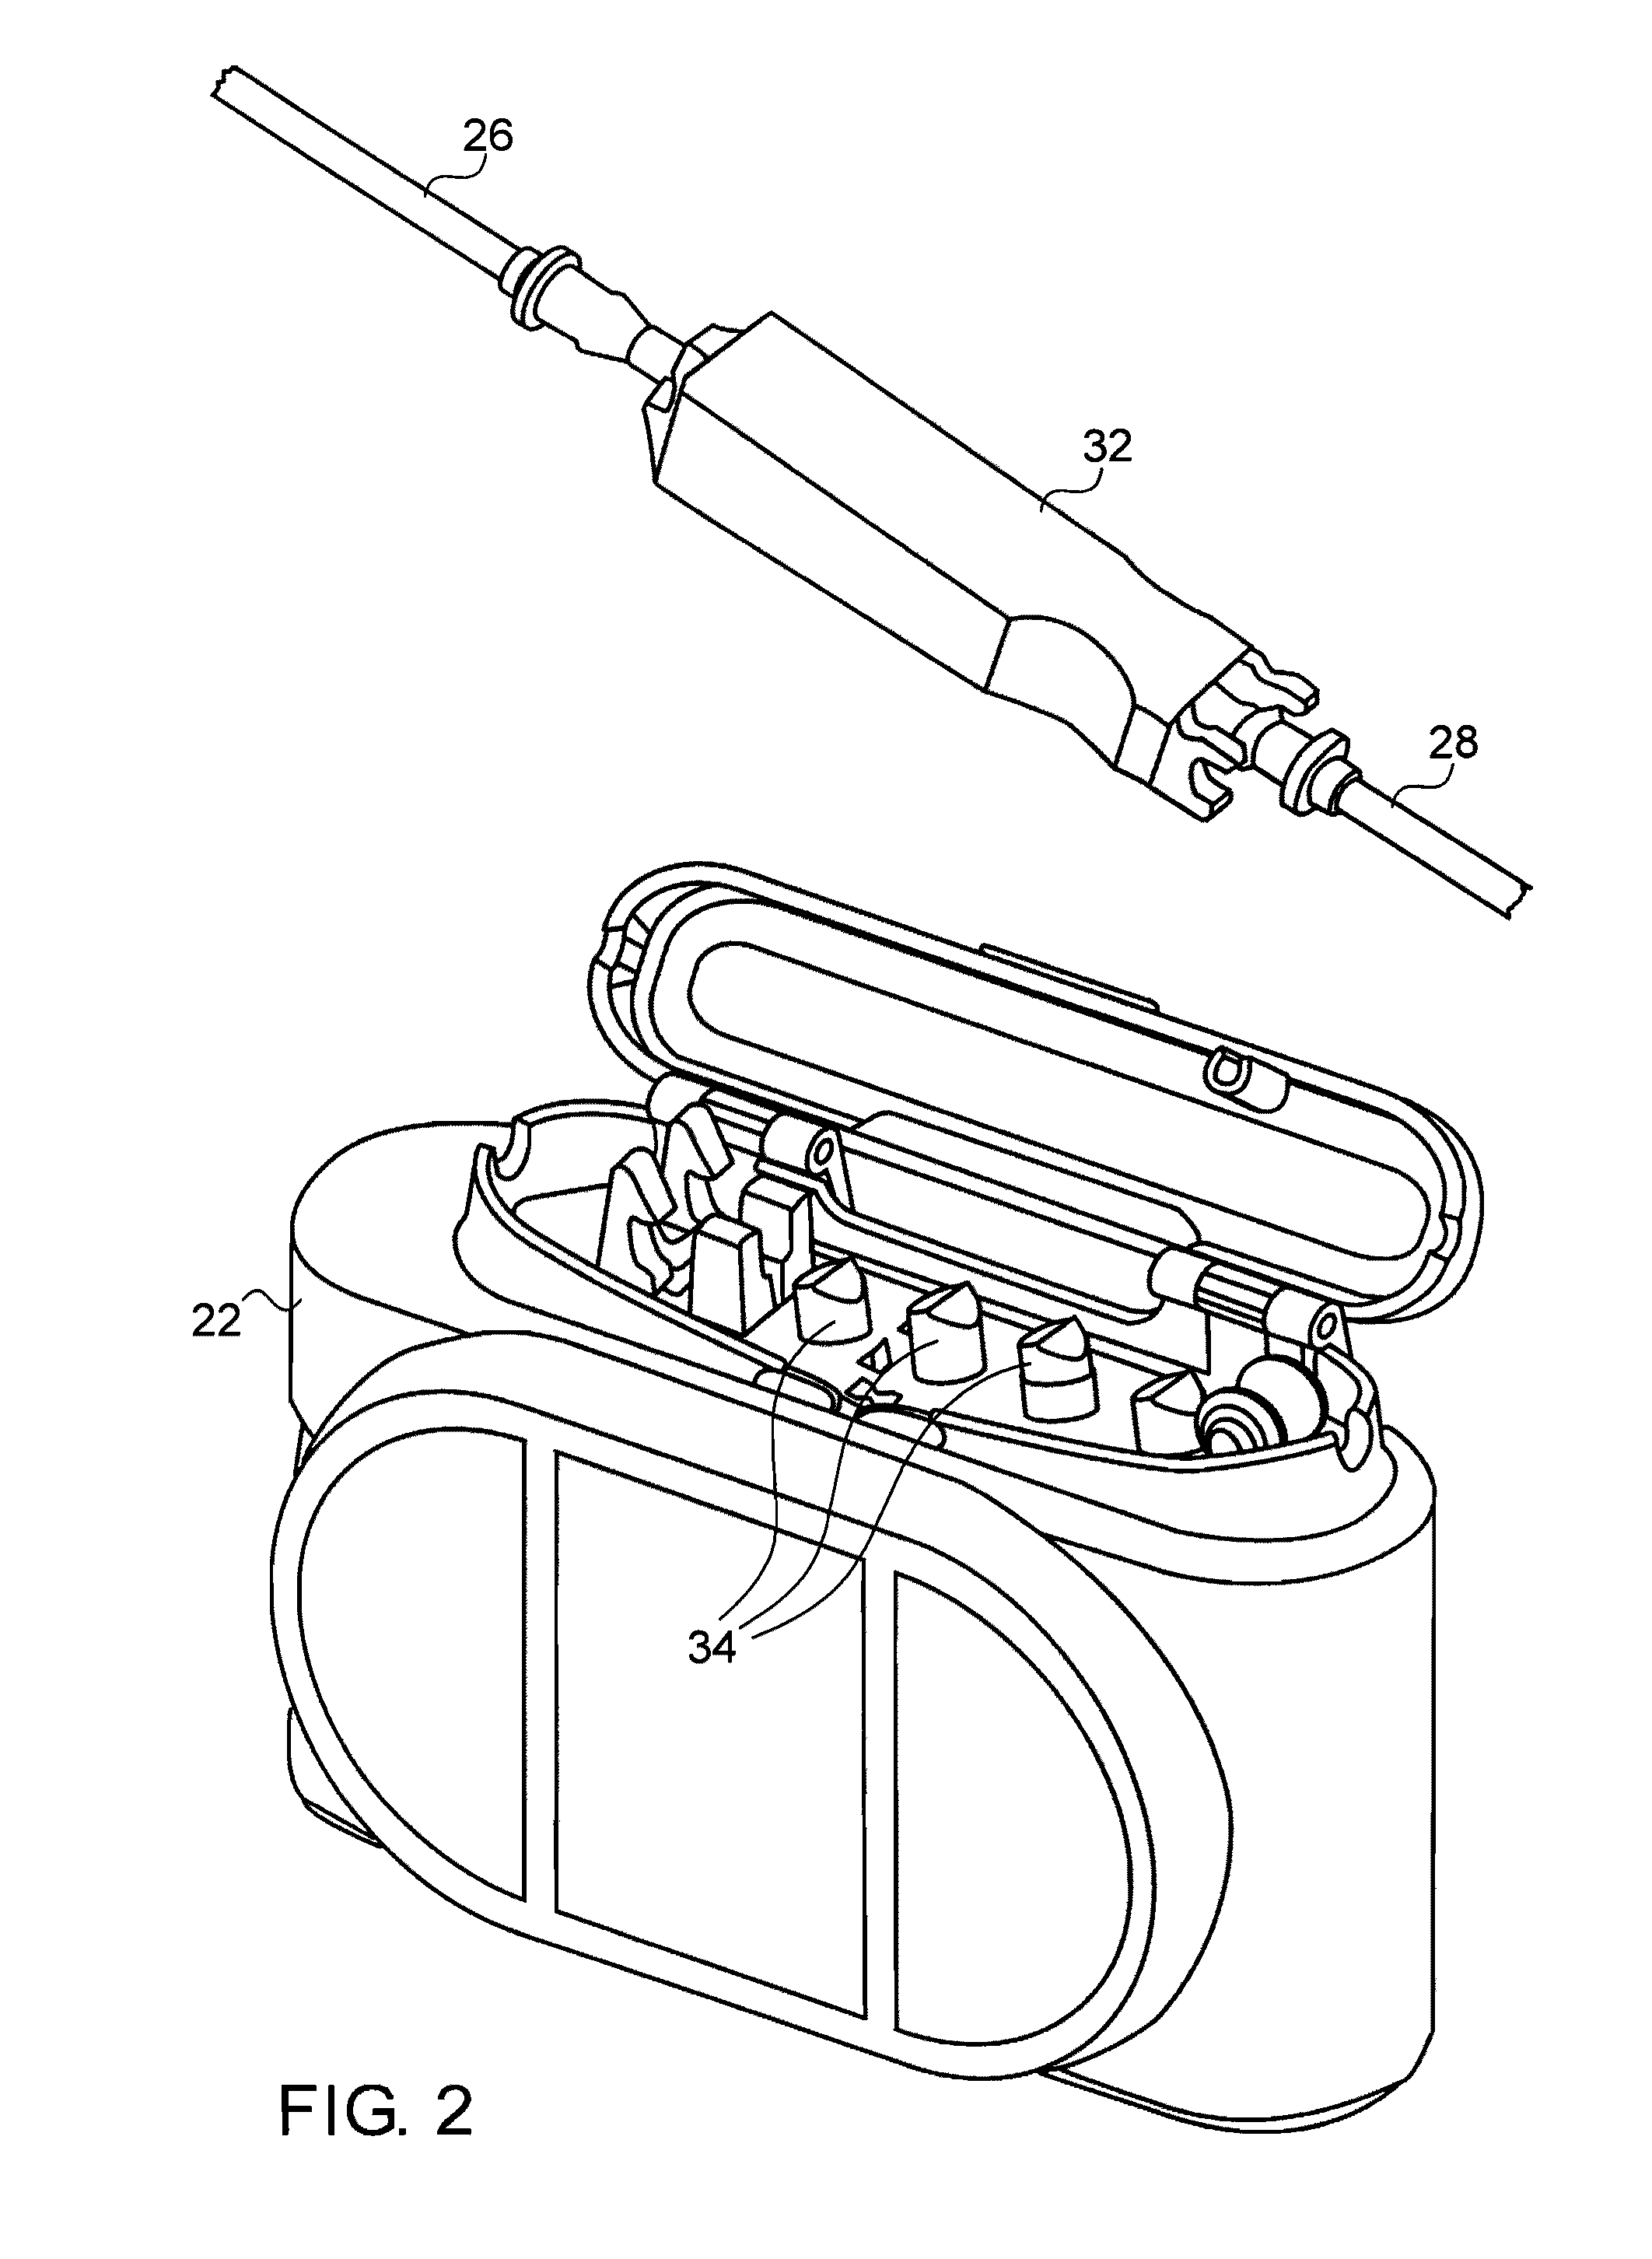 Peristaltic pump with linear flow control